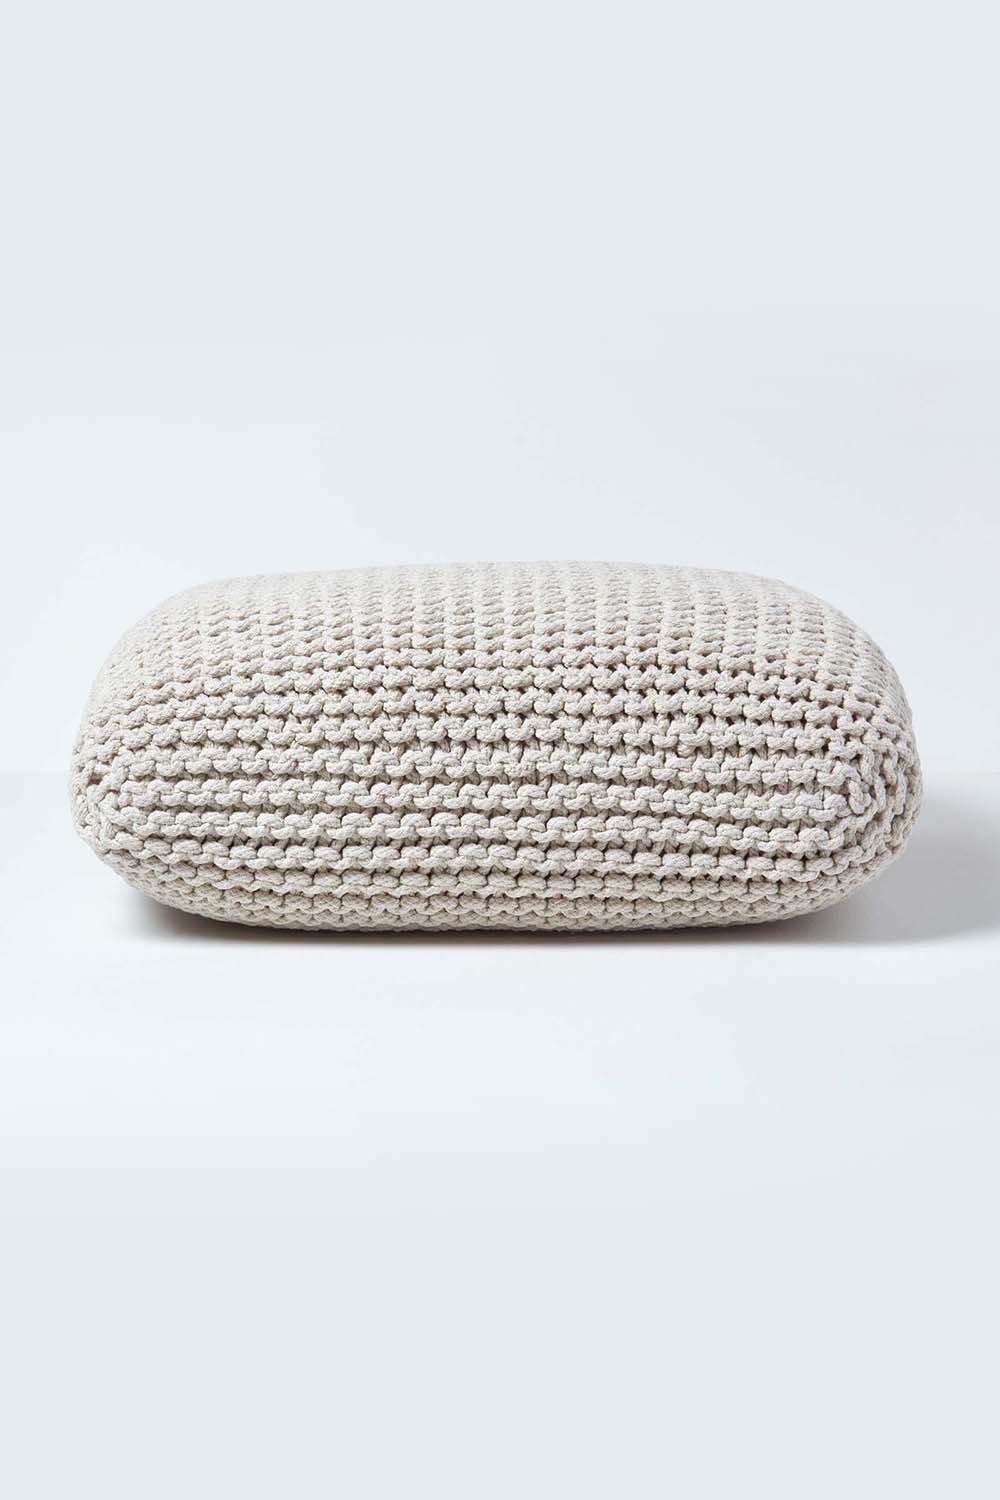 Homescapes Square Cotton Knitted Pouffe Floor Cushion|natural